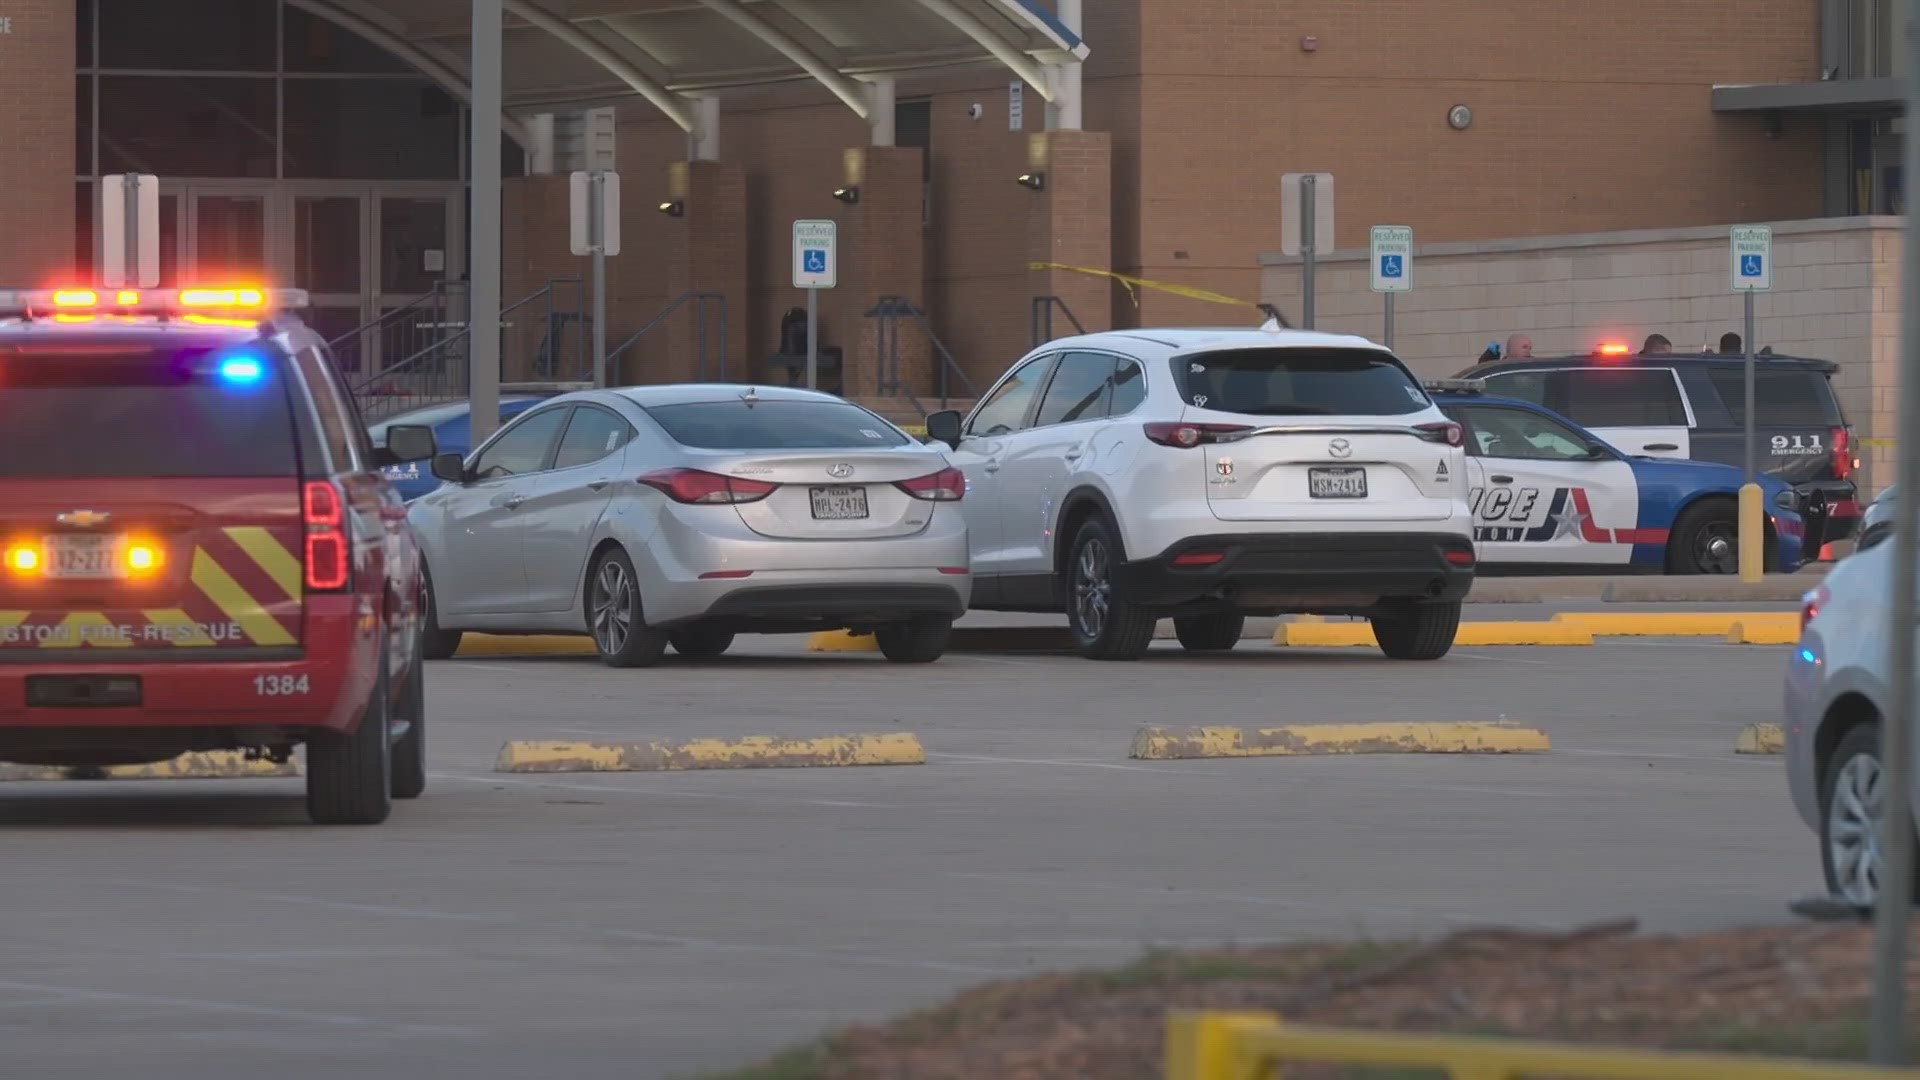 The campus has been closed for Tuesday. One Arlington ISD student was killed, one was injured, and another has been charged with capital murder.